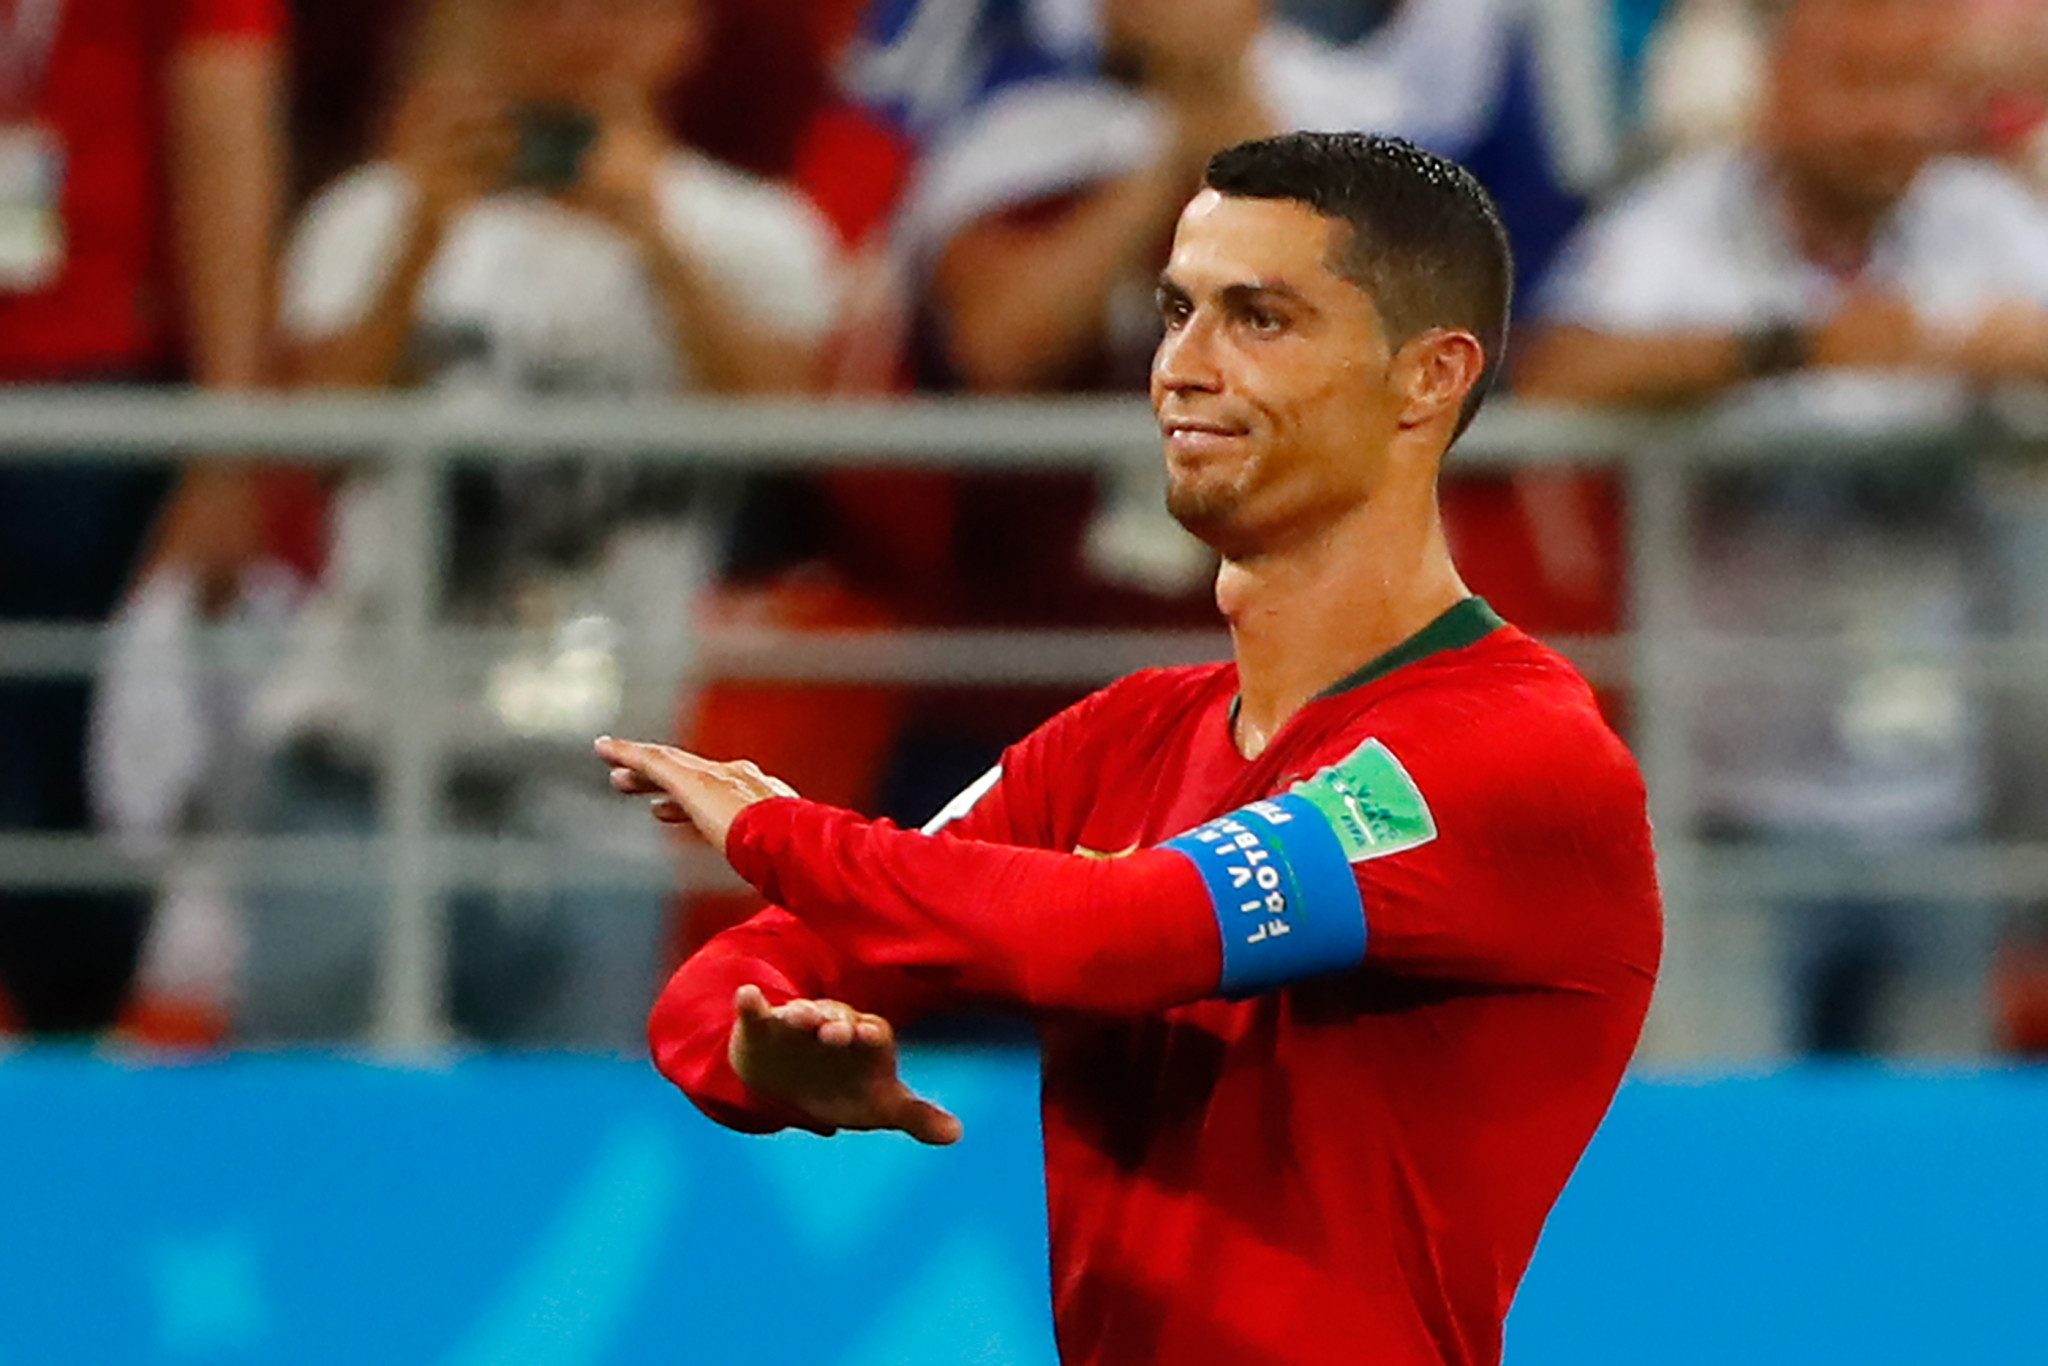 Spain pip Portugal to top spot after dramatic conclusion to Group B at FIFA World Cup